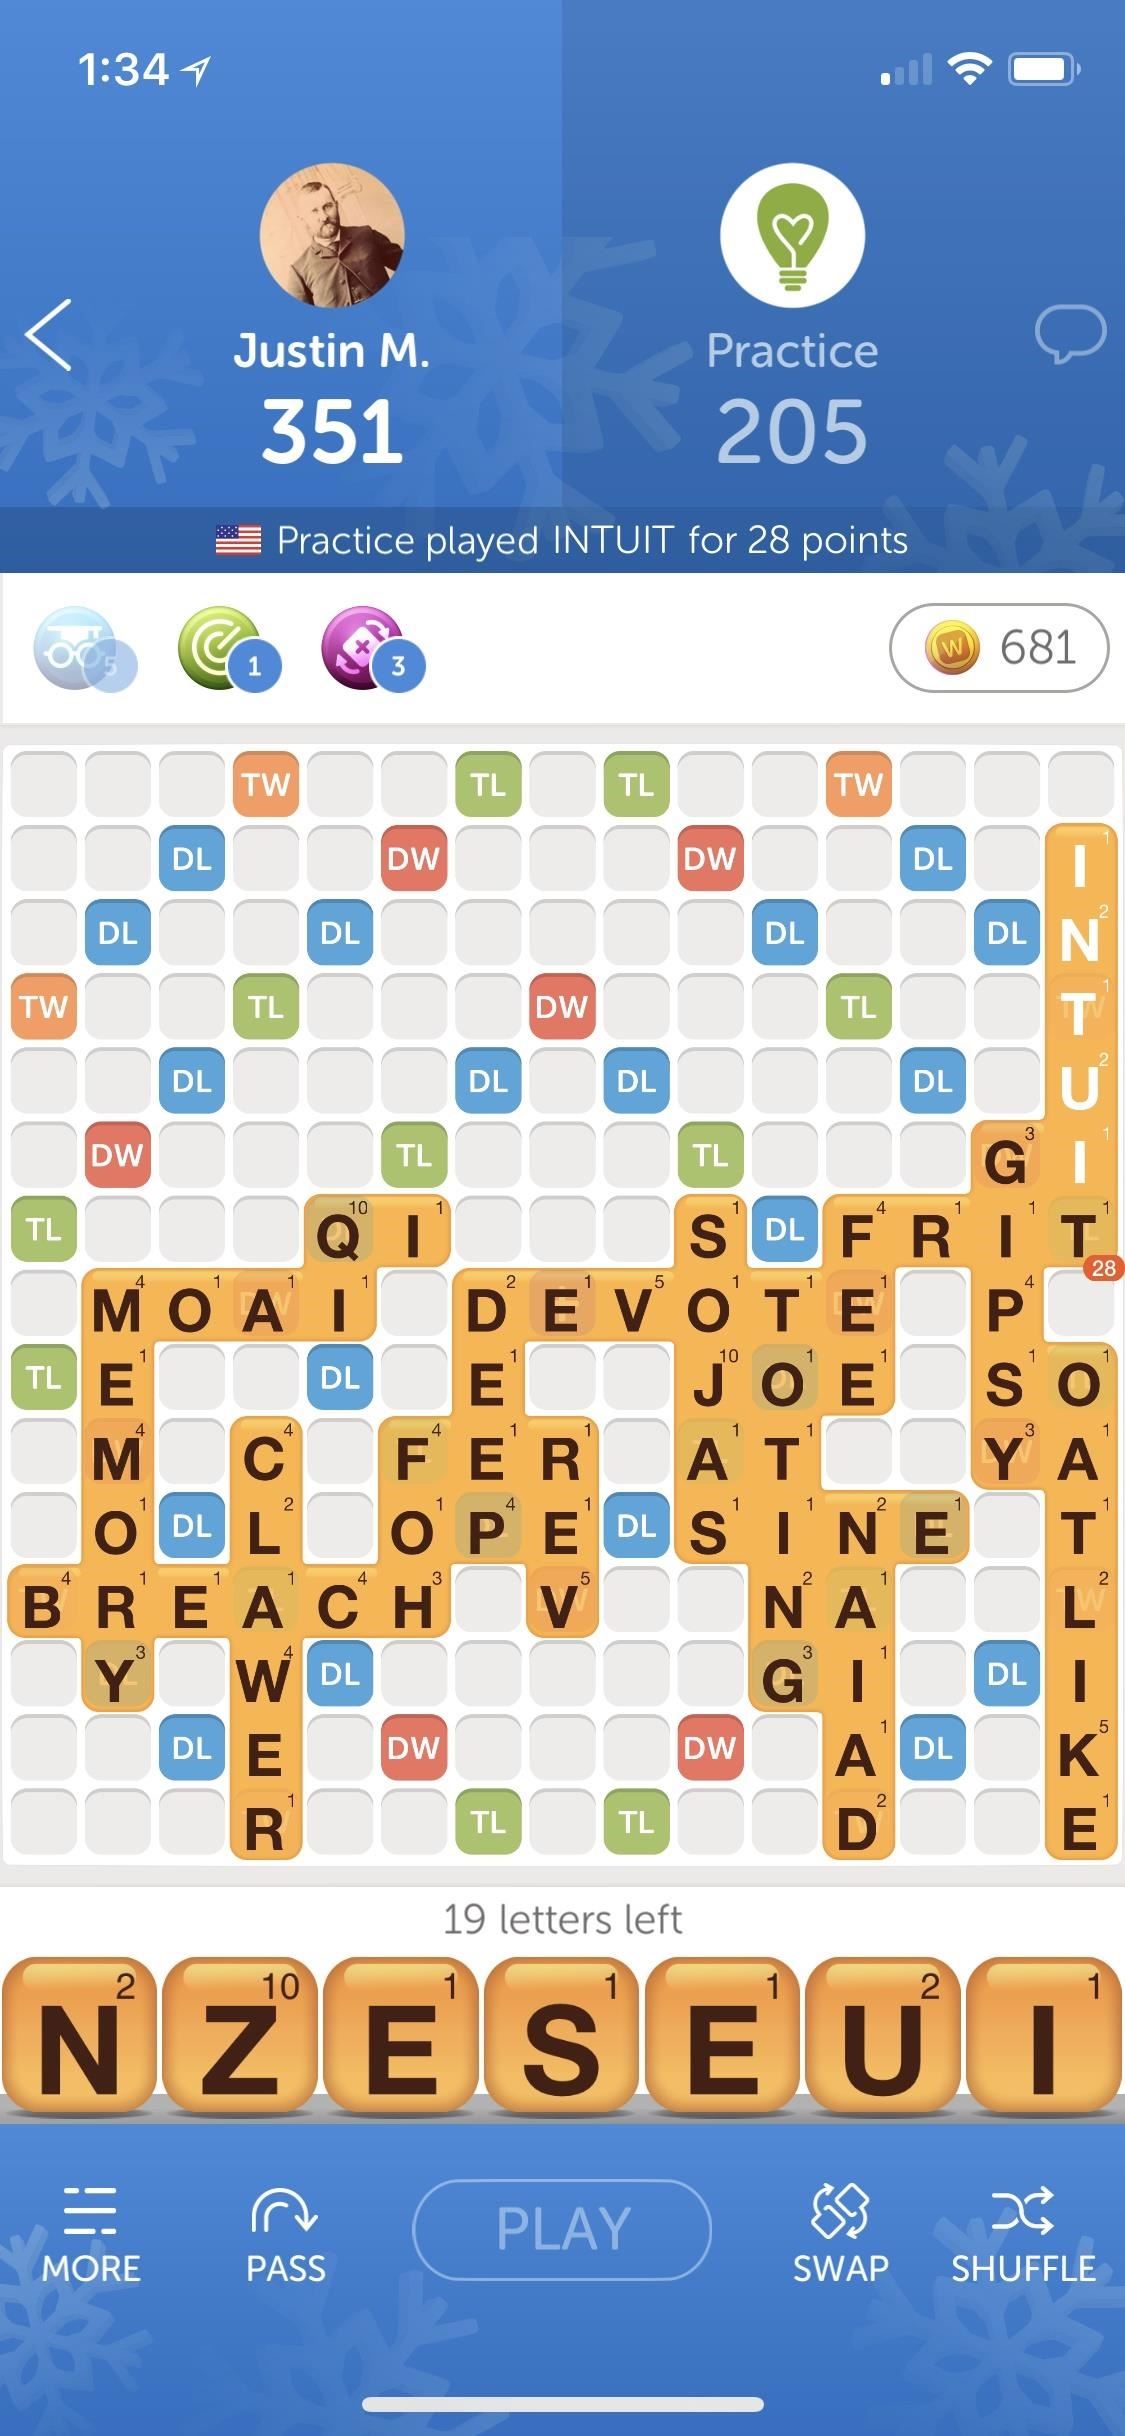 How to Use the Remaining Tiles Bag to Score Big in Words with Friends